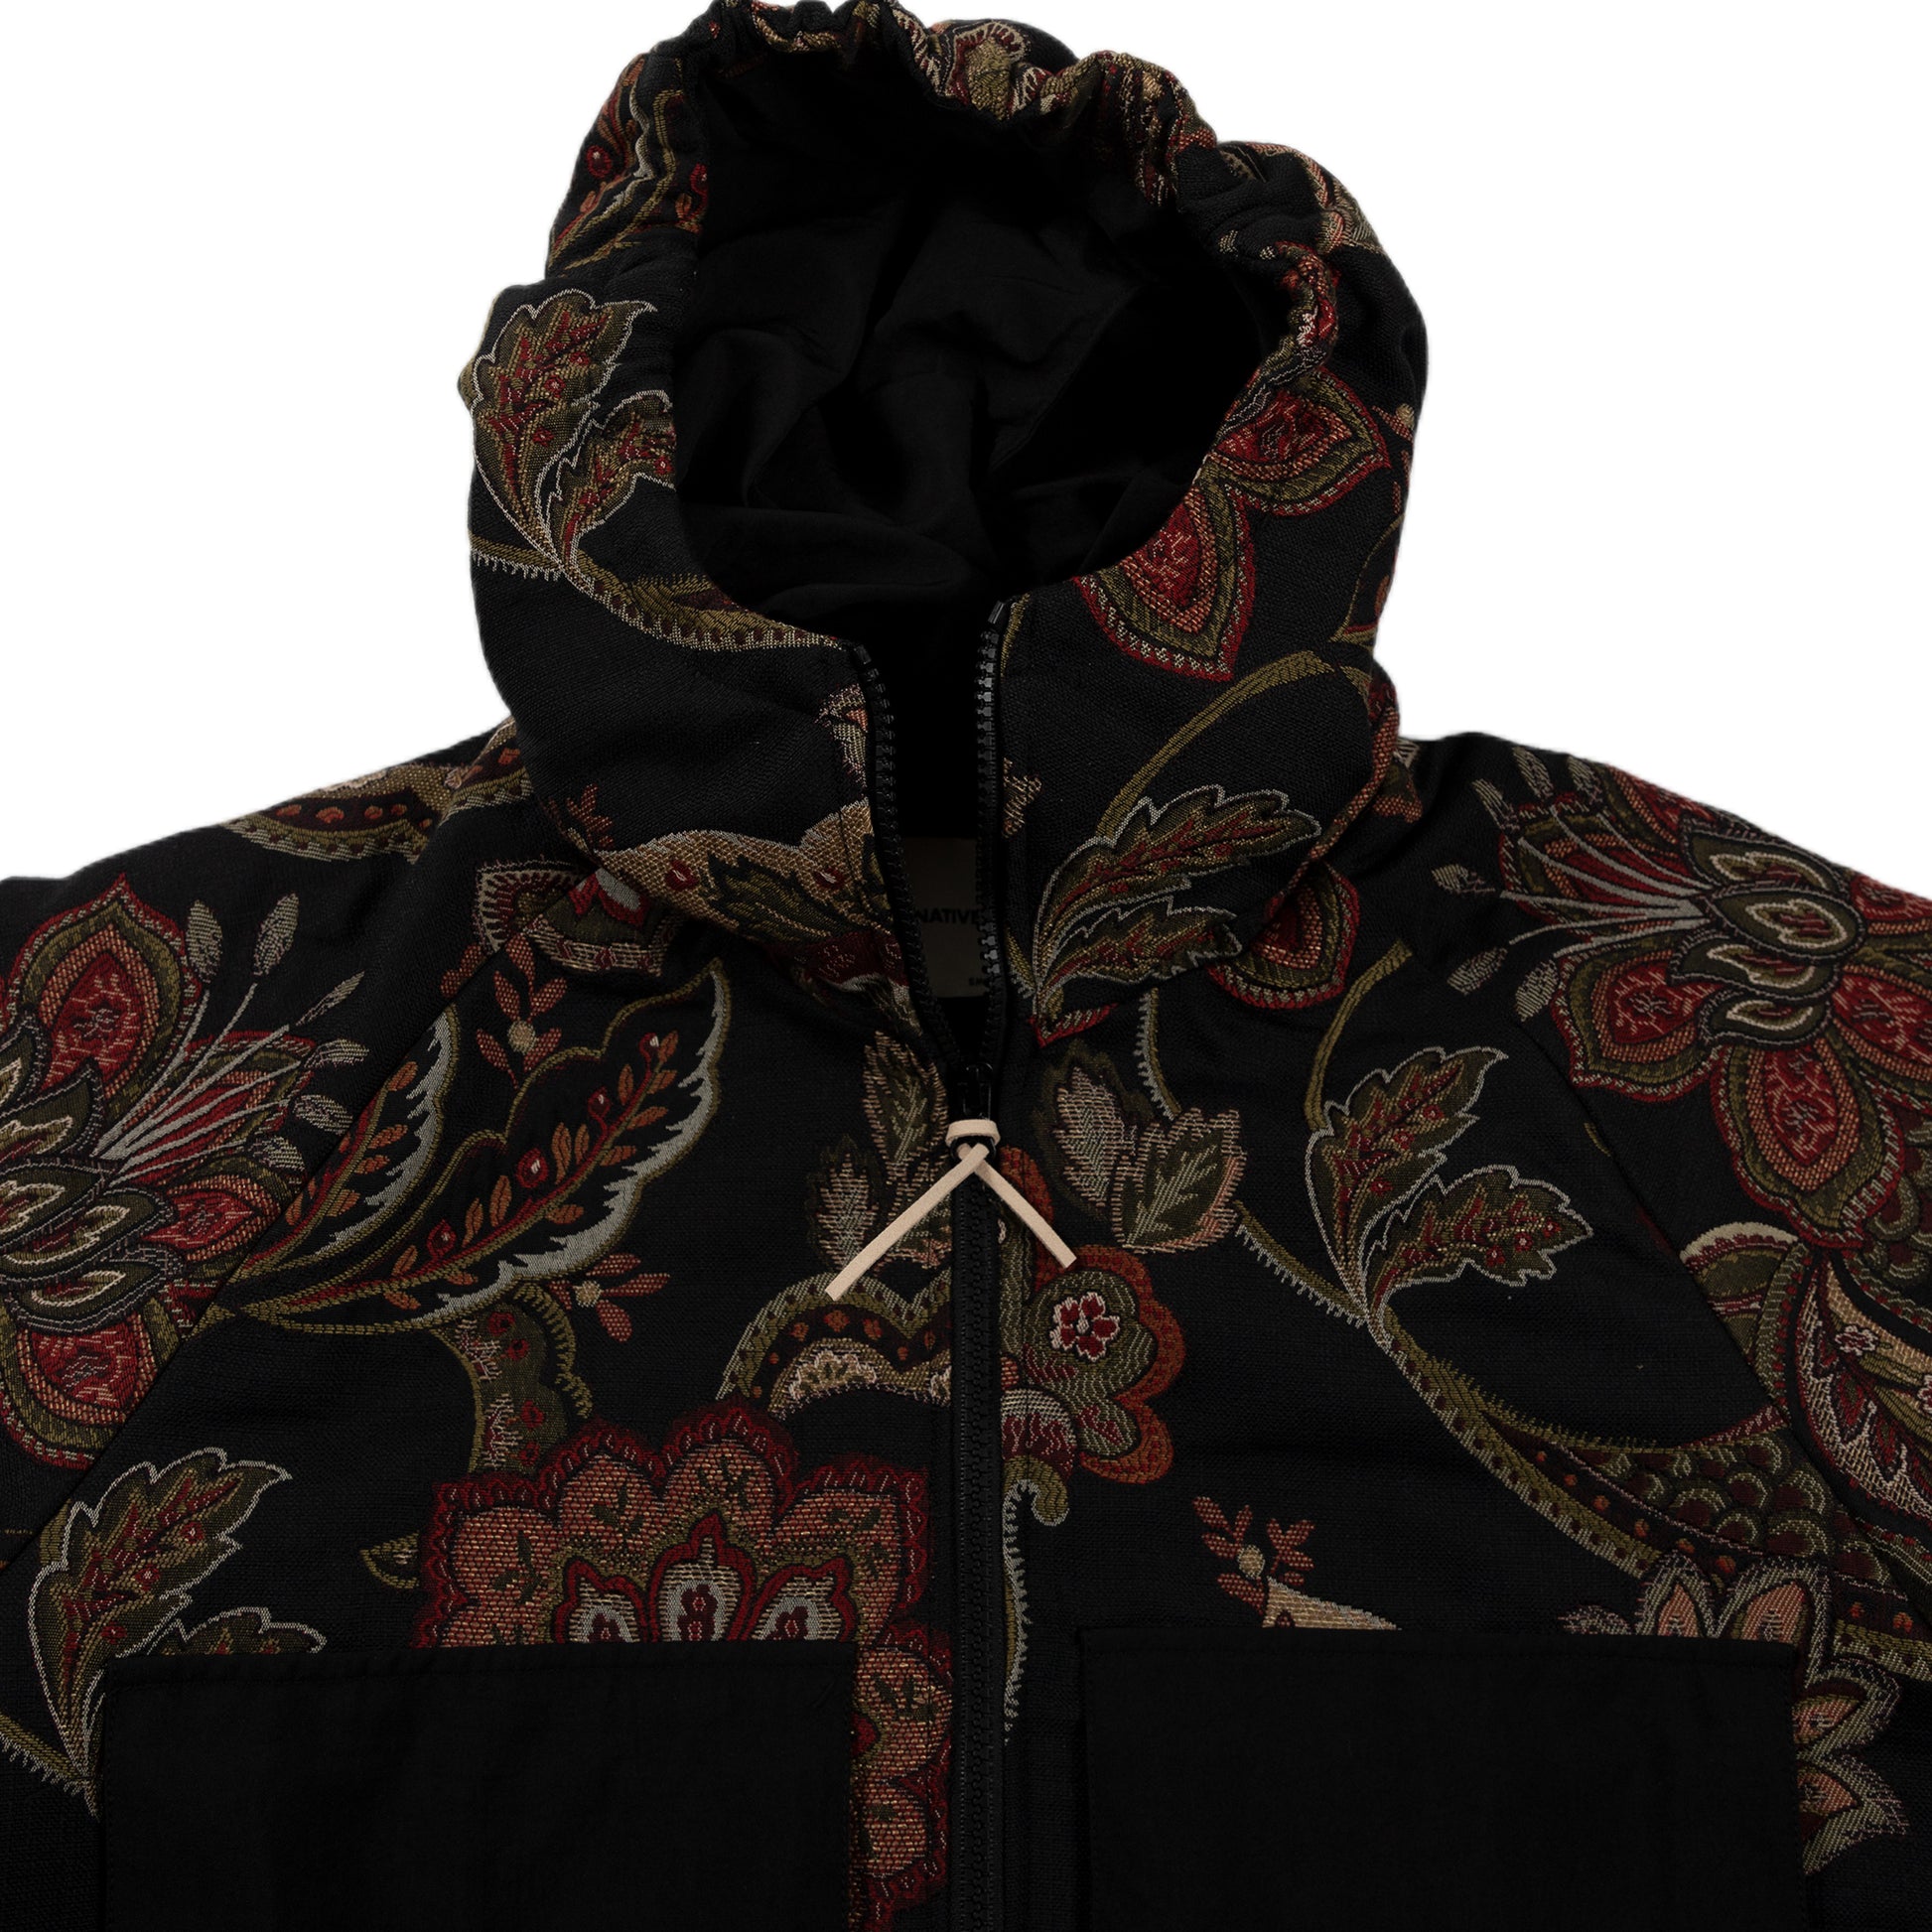 Native North Orchid Jacquard Hood Jacket Outerwear Hoodie Navy Floral Detail